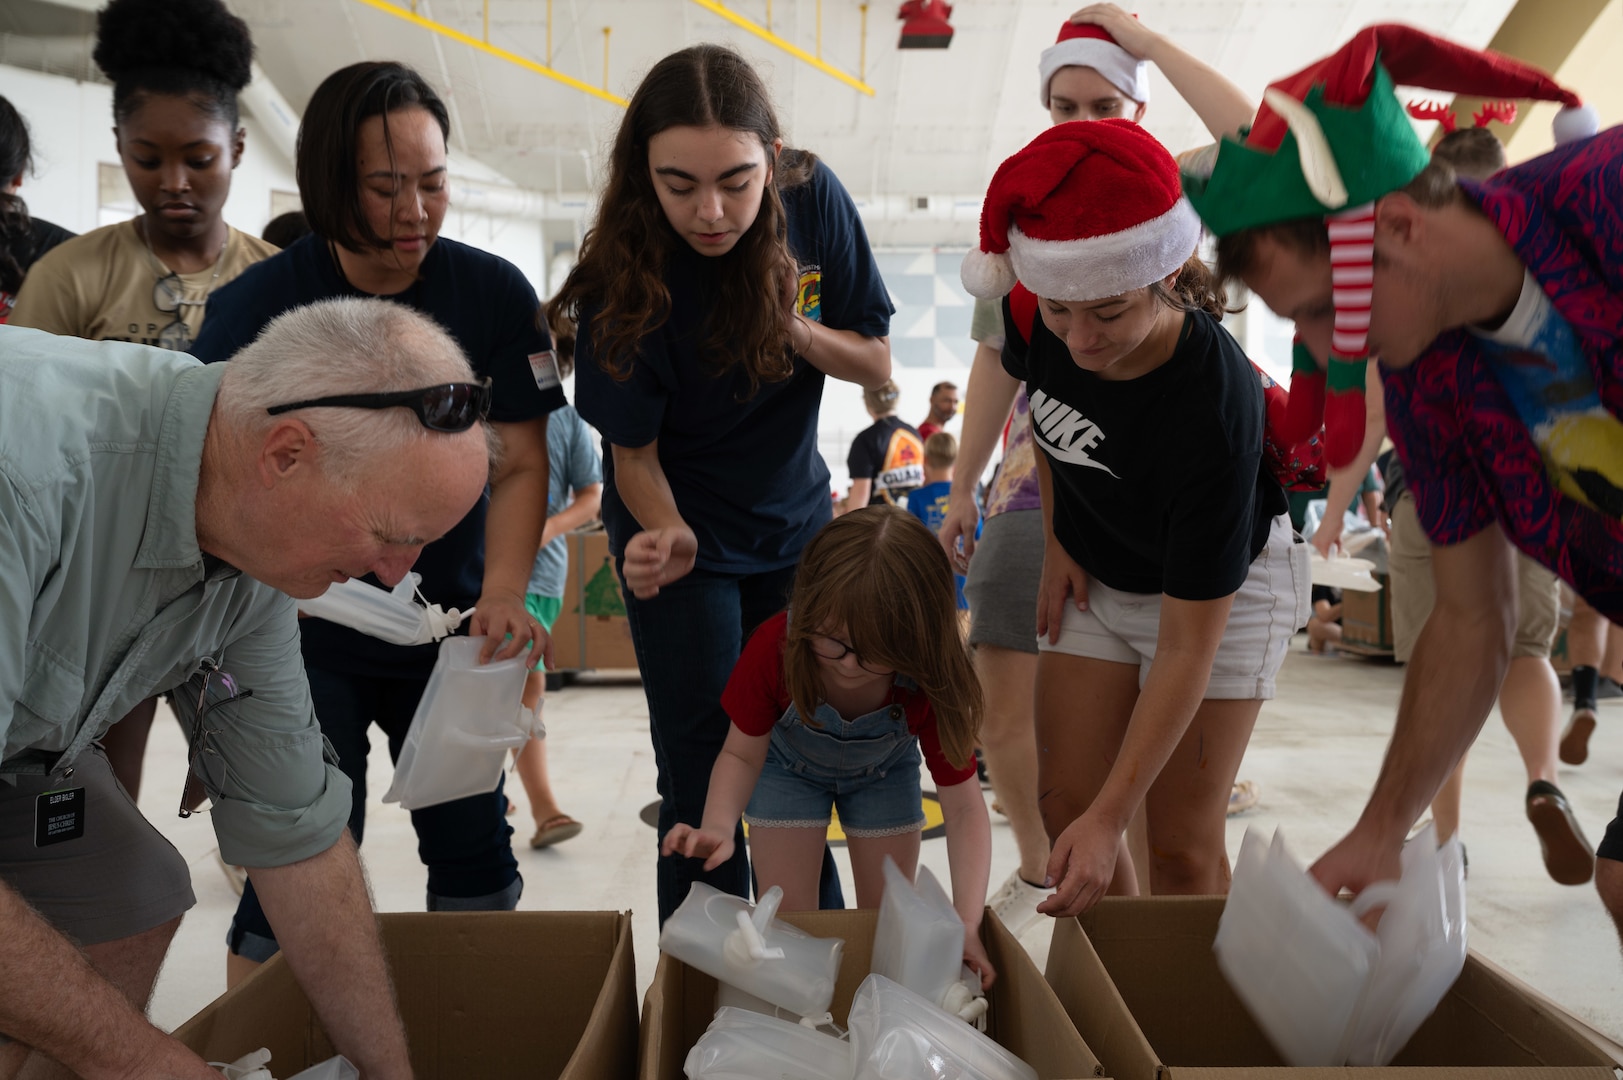 U.S. Air Force members assigned to the 36th Expeditionary Airlift Squadron and children collect items to fill a bundle of humanitarian aid during the annual bundle building event in support of Operation Christmas Drop 2023 (OCD 23) at Andersen Air Force Base, Guam, Dec. 2. 2023. The tradition began during the Christmas season in 1952 when a B-29 Superfortress aircrew saw islanders waving at them from the island of Kapingamarangi, 3,500 miles southwest of Hawaii. In the spirit of Christmas, the aircrew dropped a bundle of supplies attached to a parachute to the islanders below, giving the operation its name. Today, airdrop operations include more than 50 islands throughout the Pacific. (U.S. Air Force photo by Senior Airman Brooklyn Golightly)